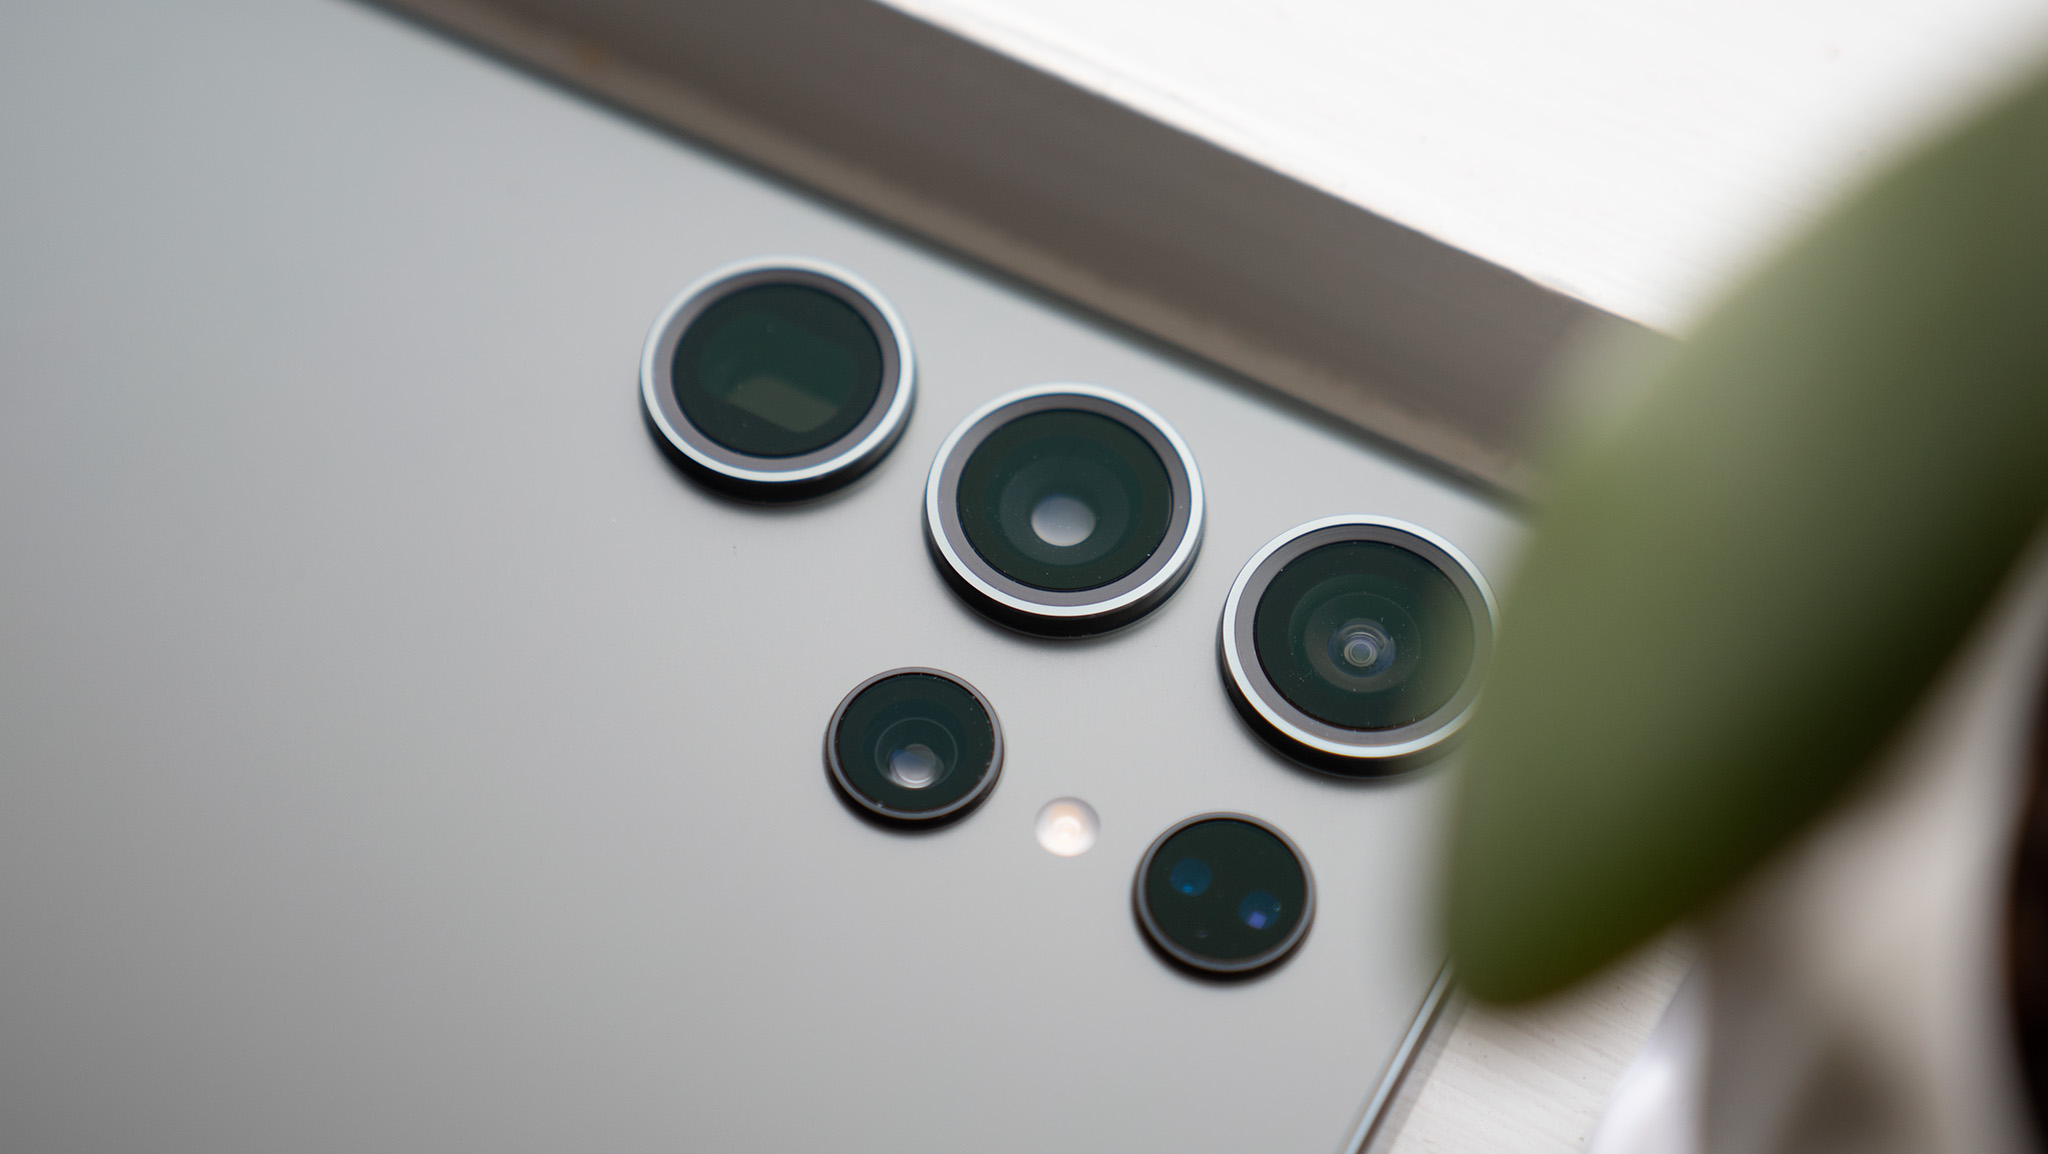 The protruding camera modules on the Samsung Galaxy S23 Ultra